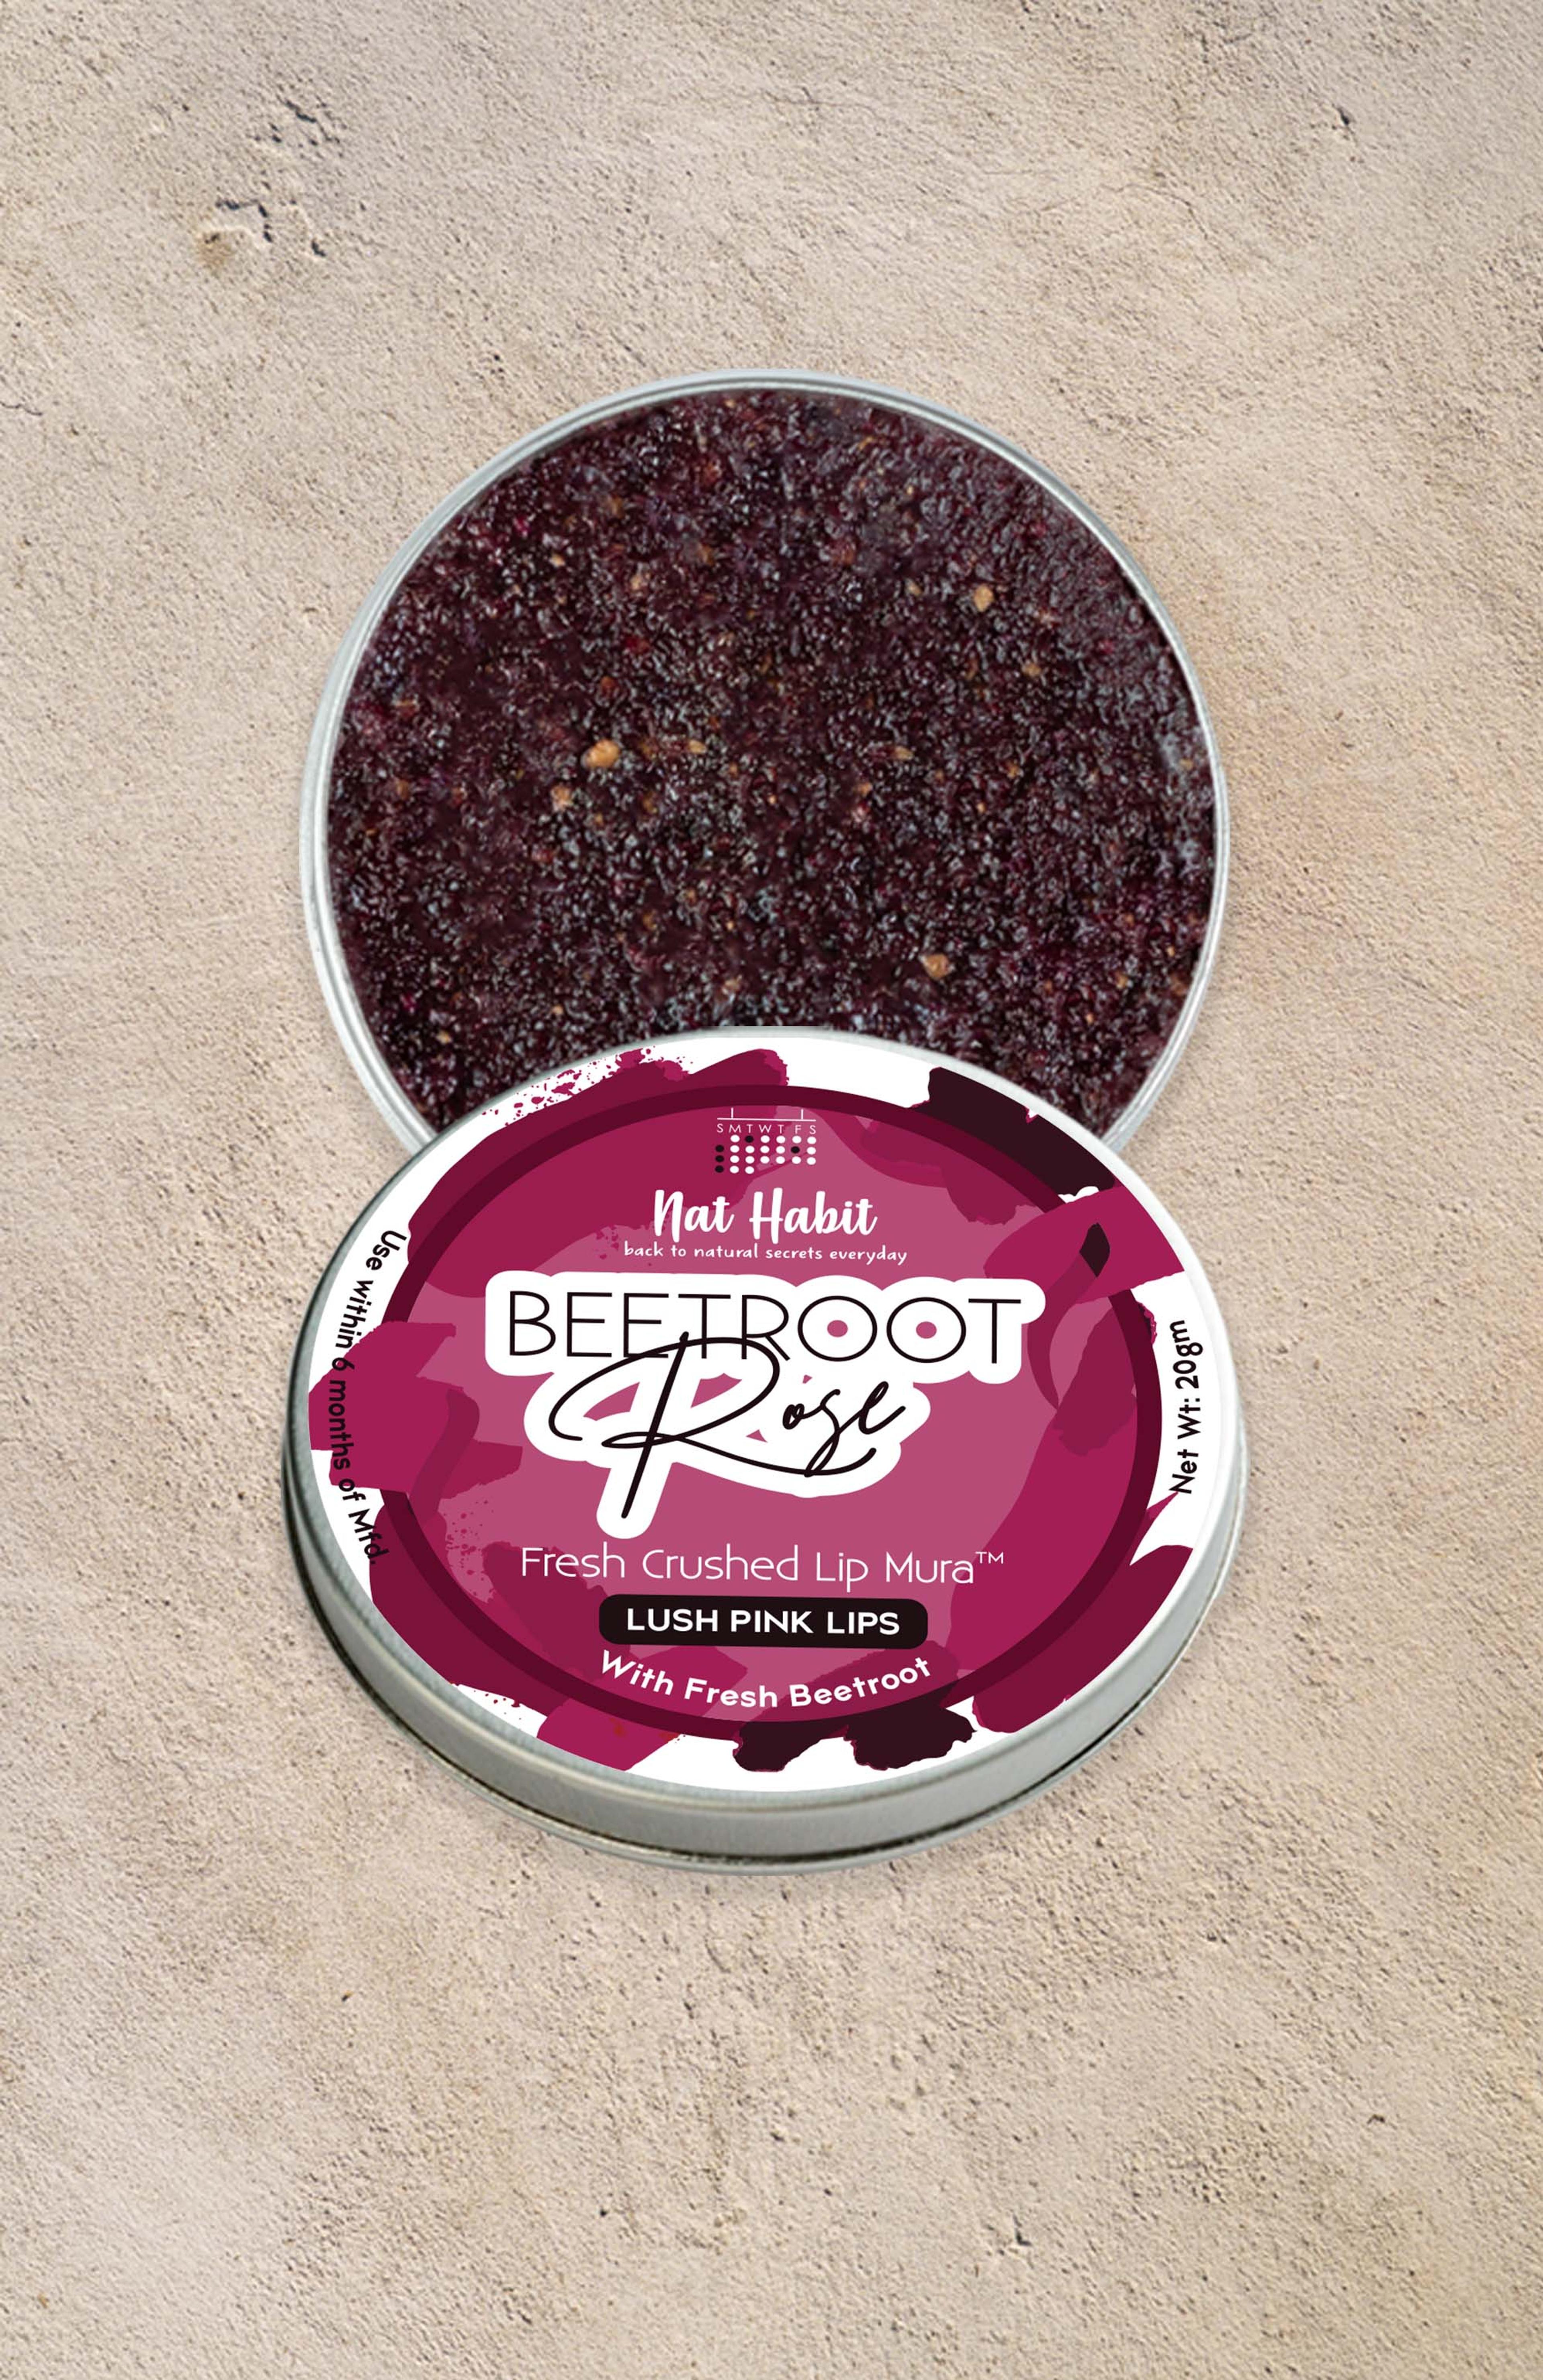 beetroot-rose-first